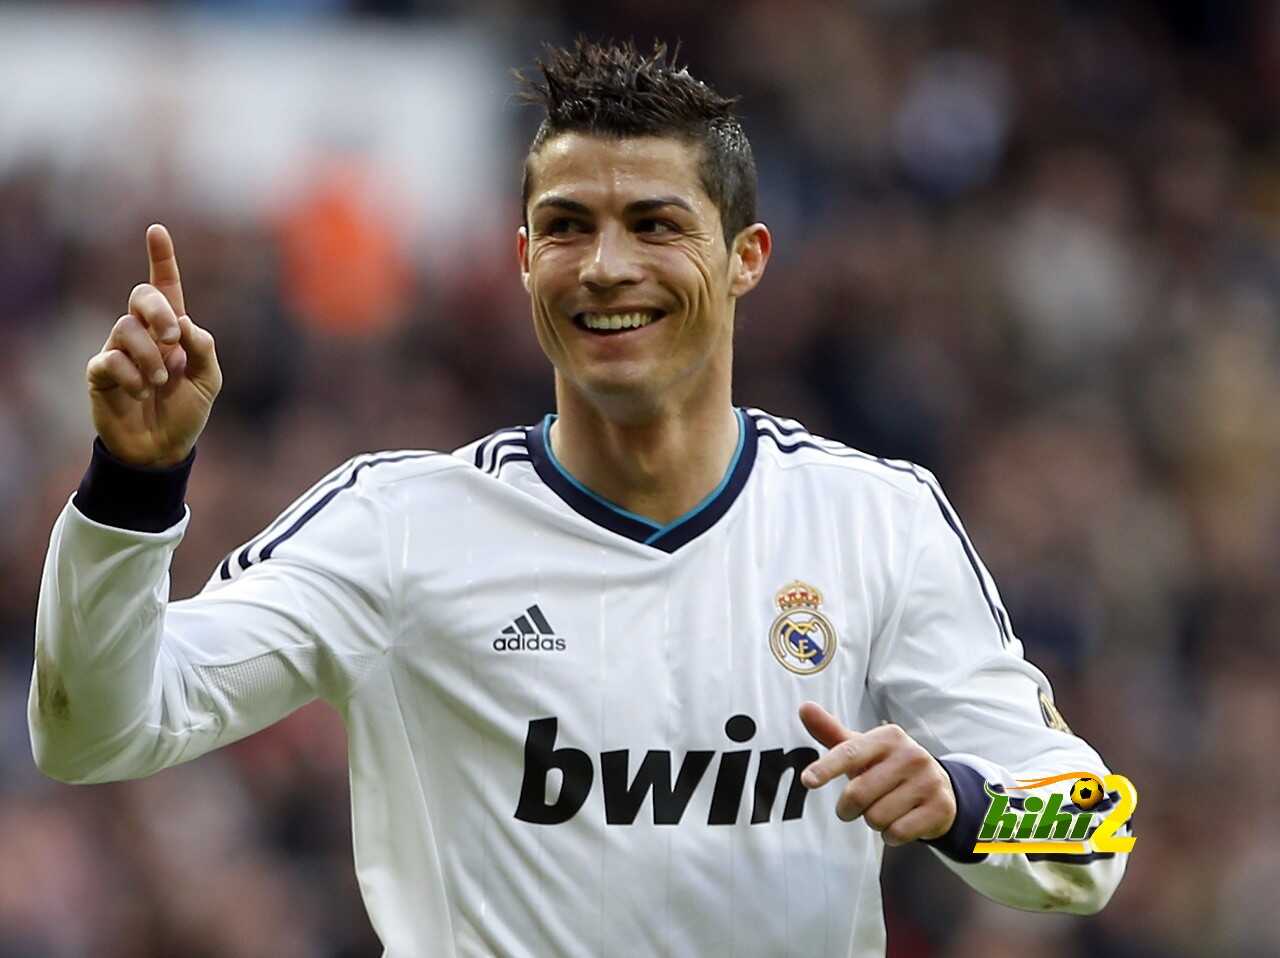 Real Madrid's Cristiano Ronaldo celebrates after scoring a goal against Levante during their Spanish first division soccer match at Santiago Bernabeu stadium in Madrid